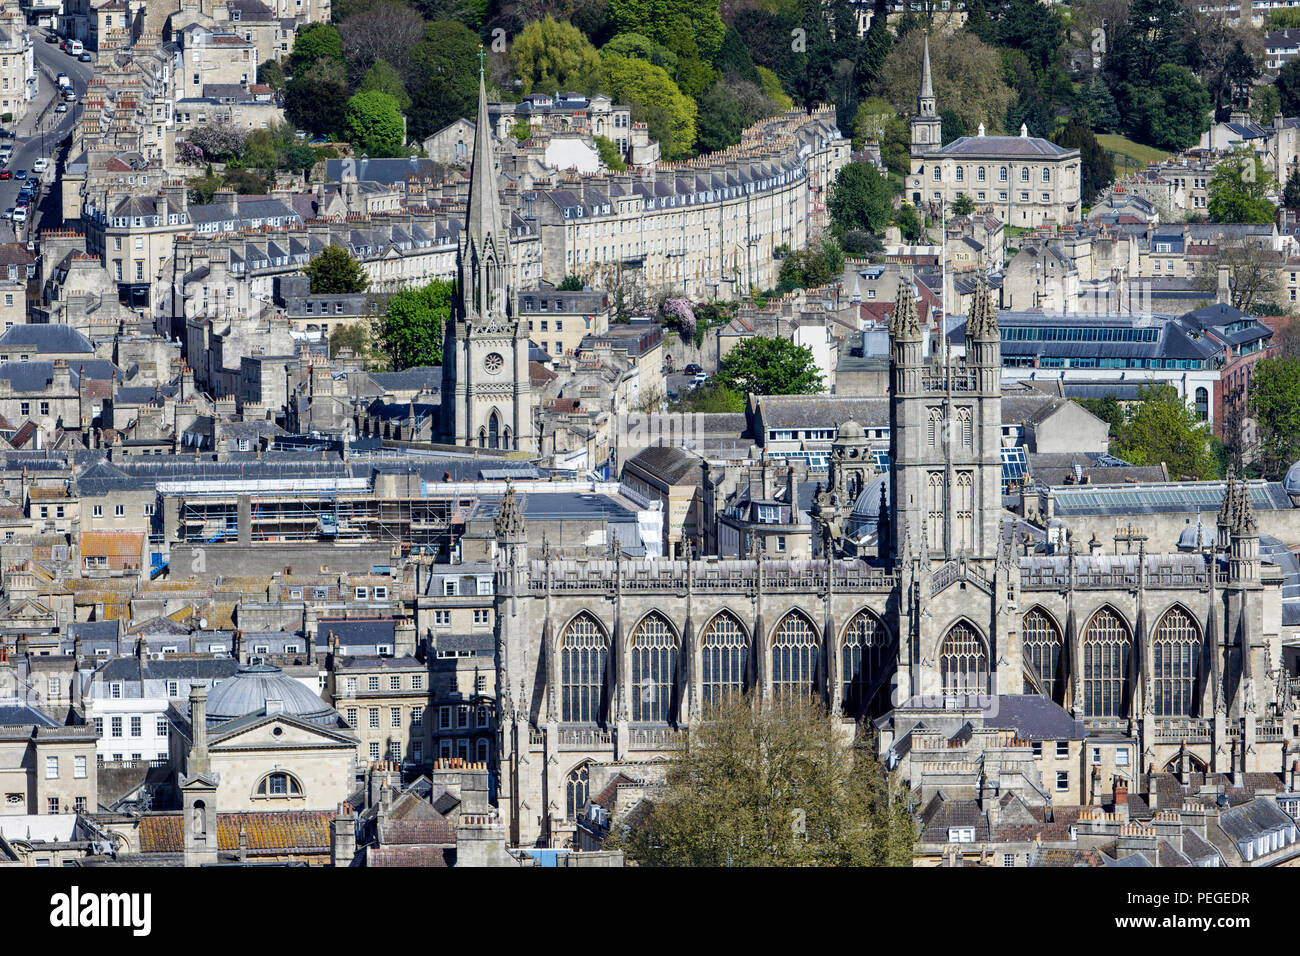 A cityscape view from Alexandra Park of the city of Bath Somerset, England, UK showing the buildings, Bath Abbey and streets of the city. Stock Photo